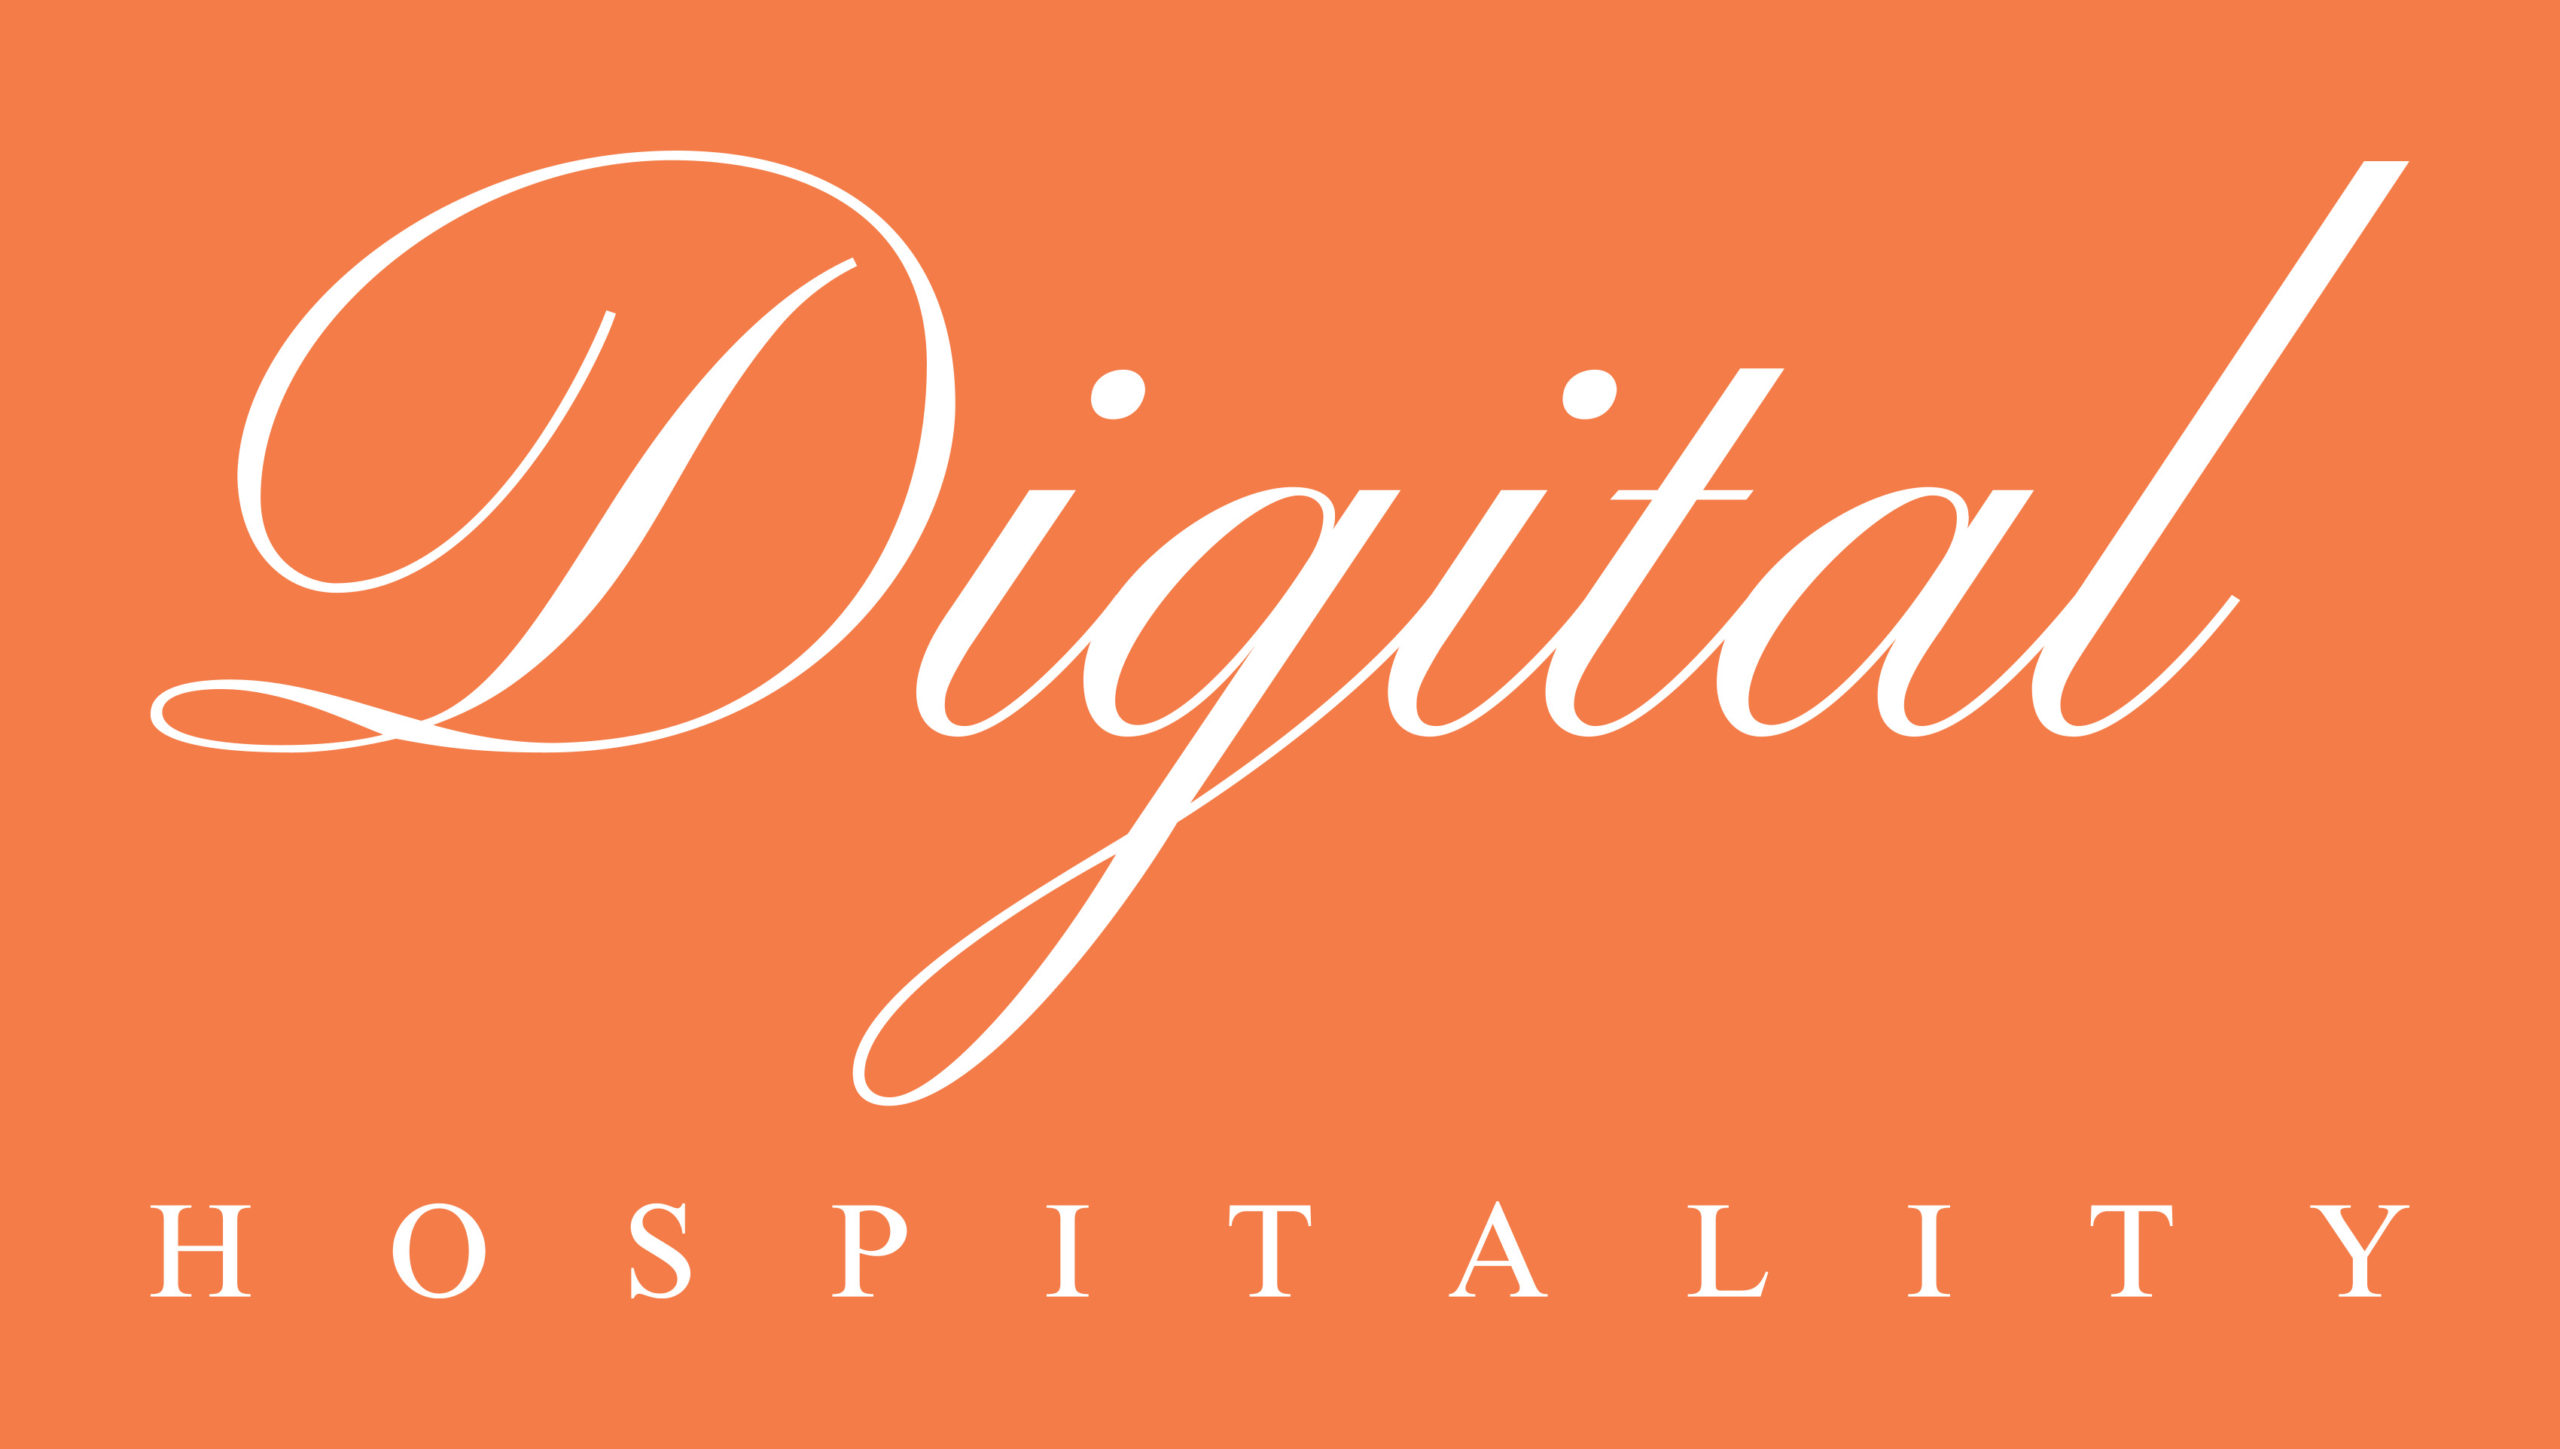 Digital Hospitality provides lifestyle management and concierge services in London